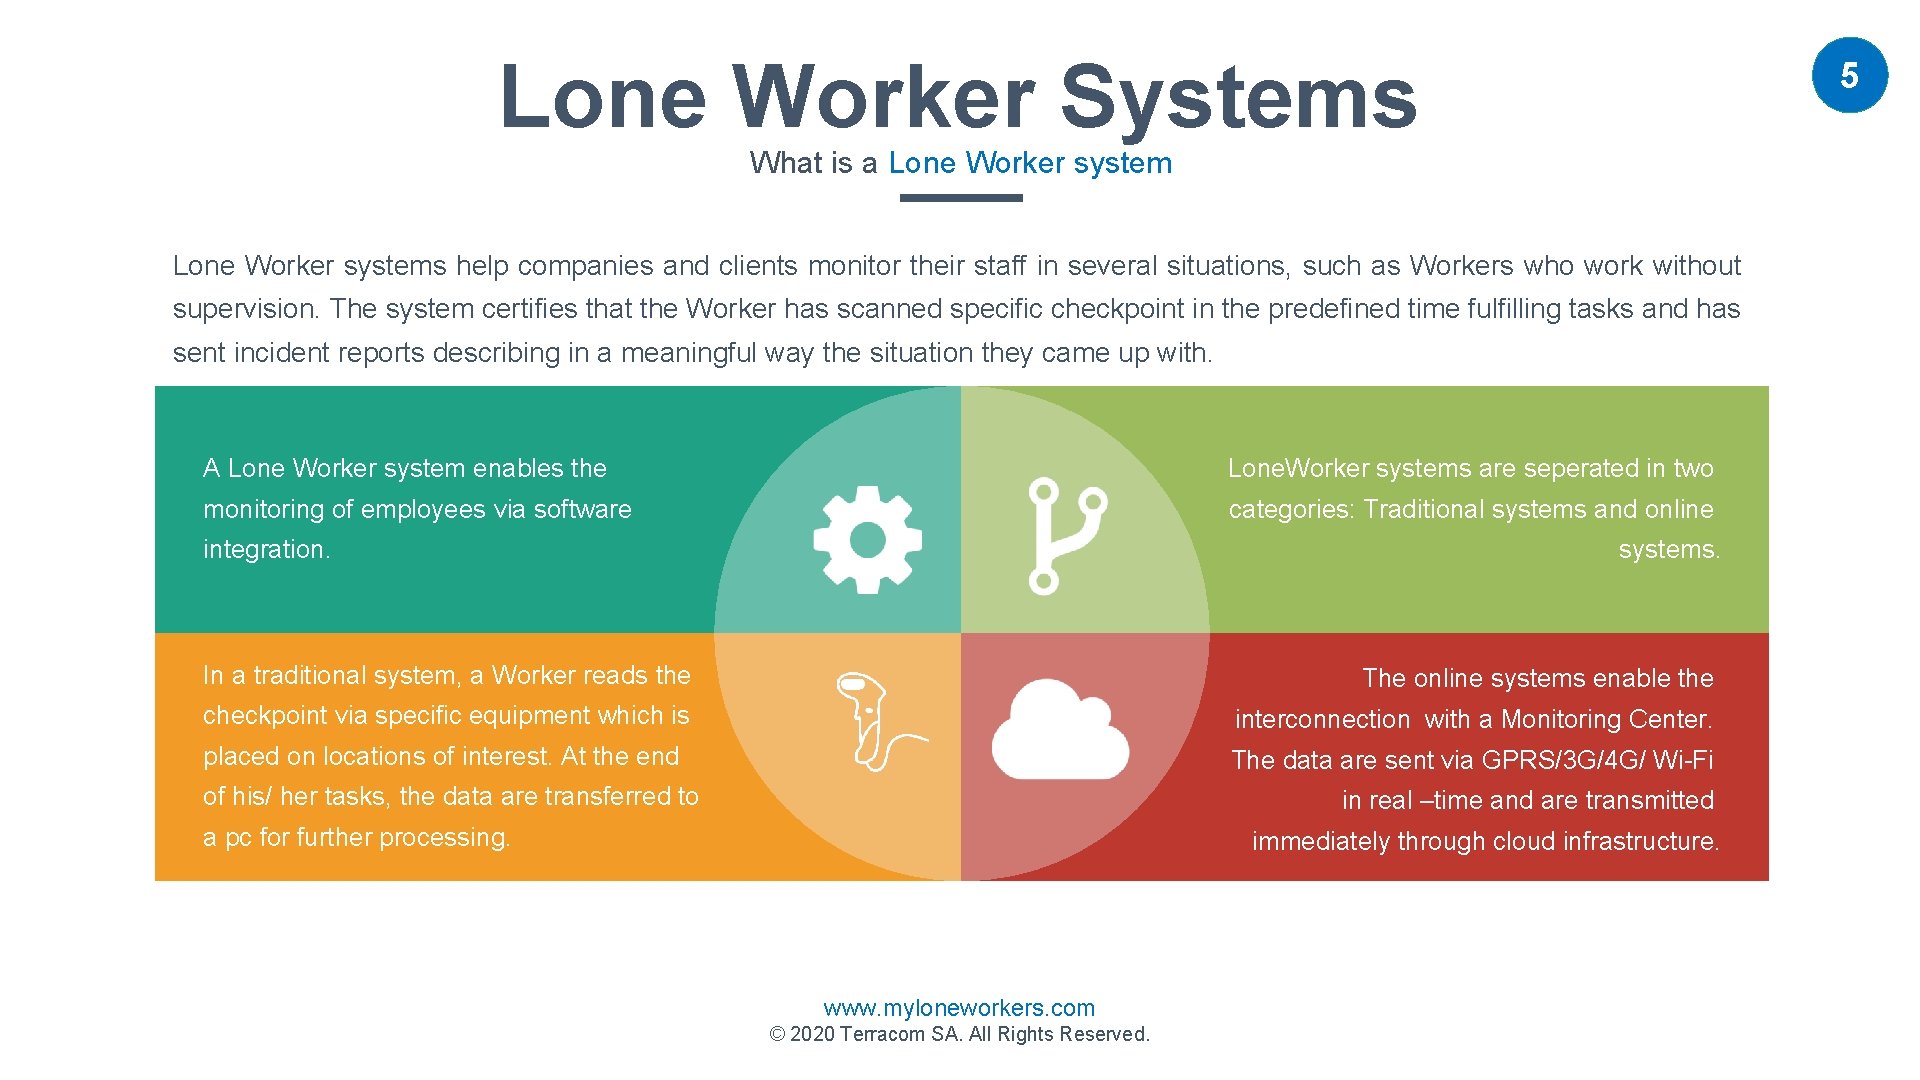 Lone Worker Systems 5 What is a Lone Worker systems help companies and clients